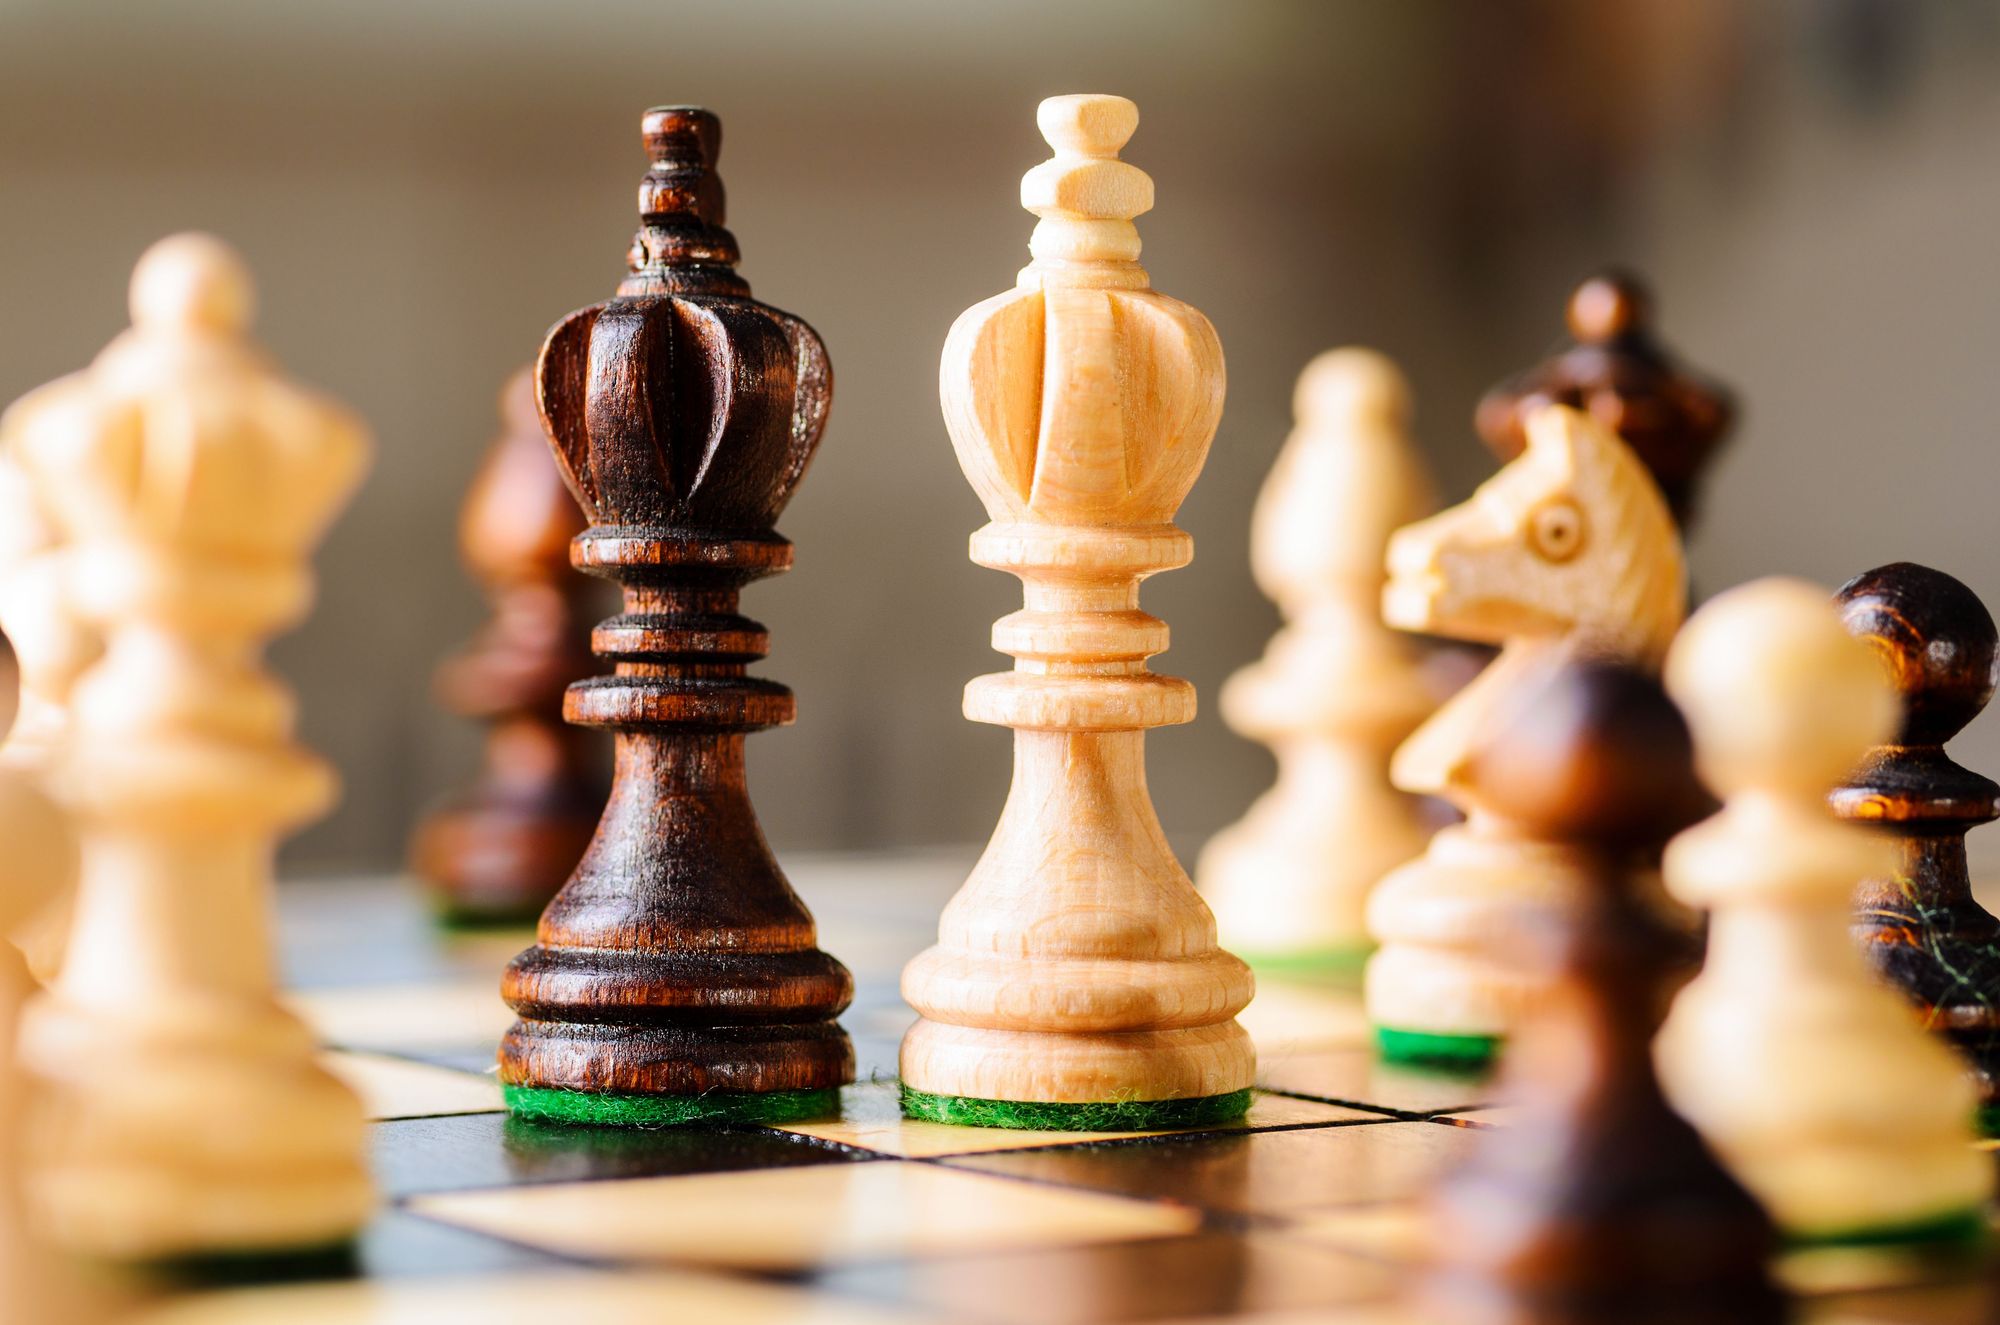 Life Lessons and the Game of Chess